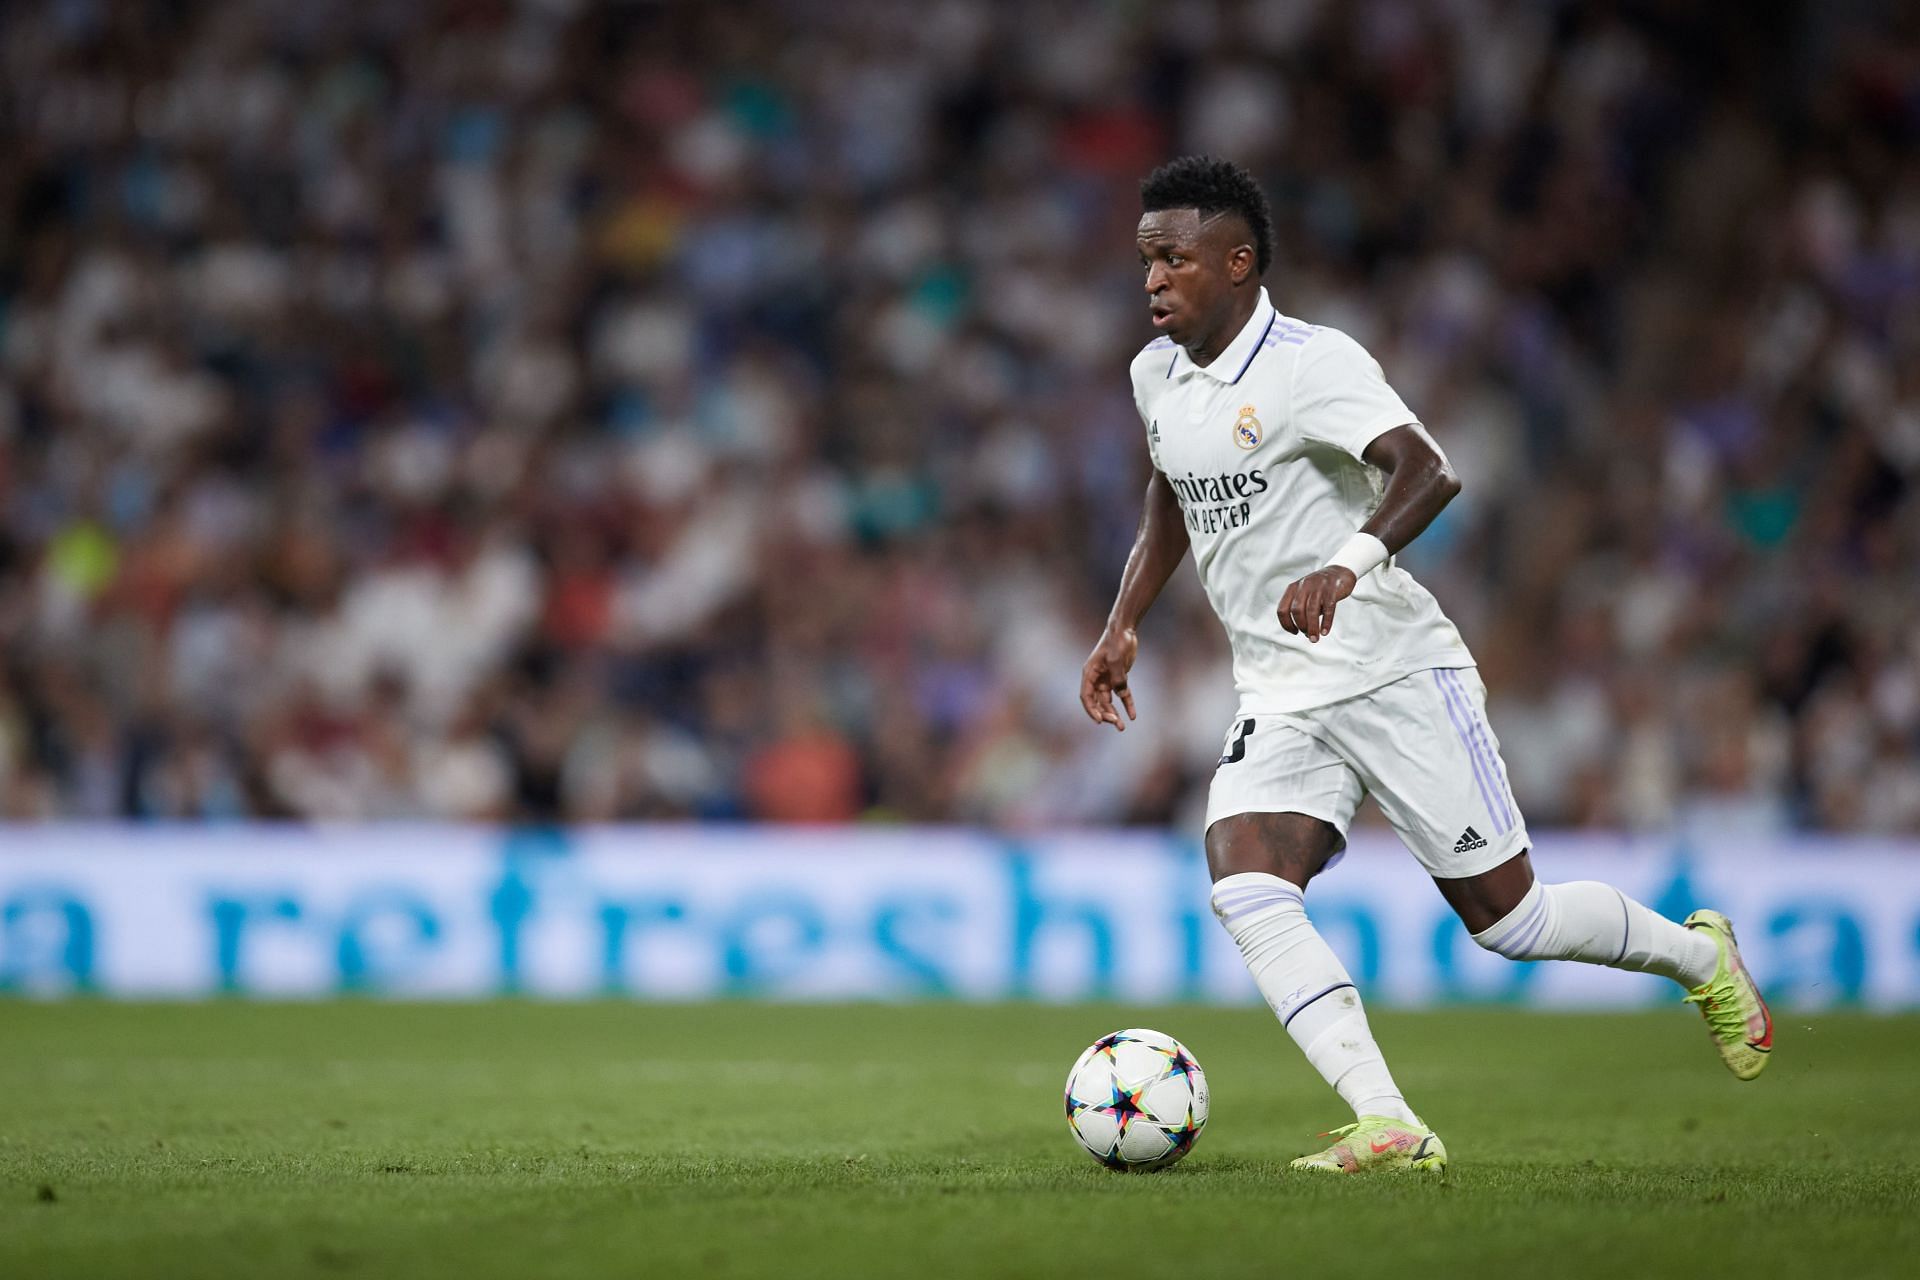 Vinicius Junior has gone from strength to strength at the Santiago Bernabeu recently.